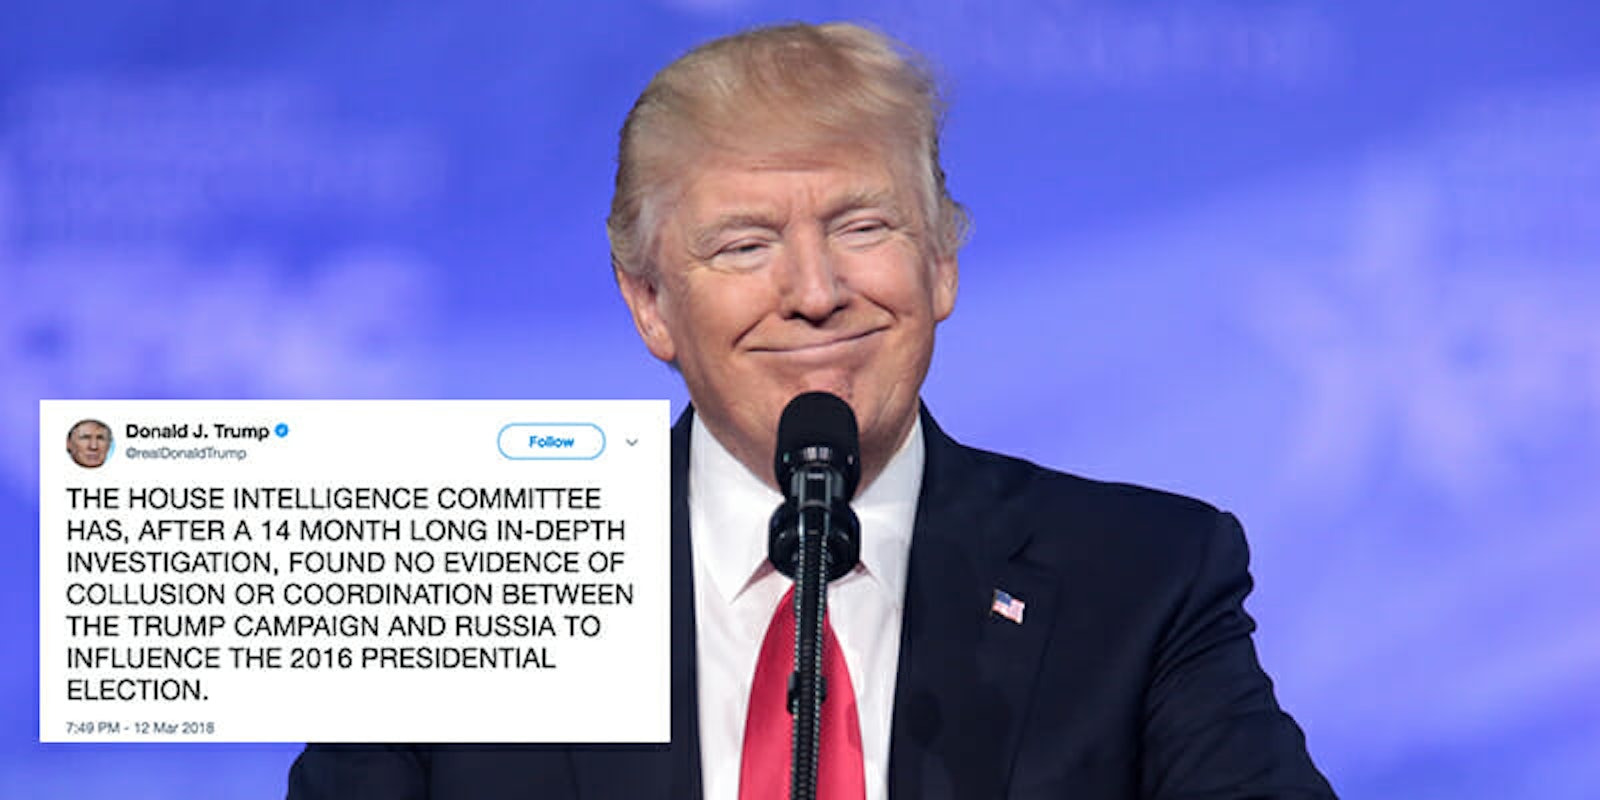 Trump tweeted in celebration after news broke that Republicans on the House Intelligence Committee are ending an investigation into Russian collusion during the 2016 election.